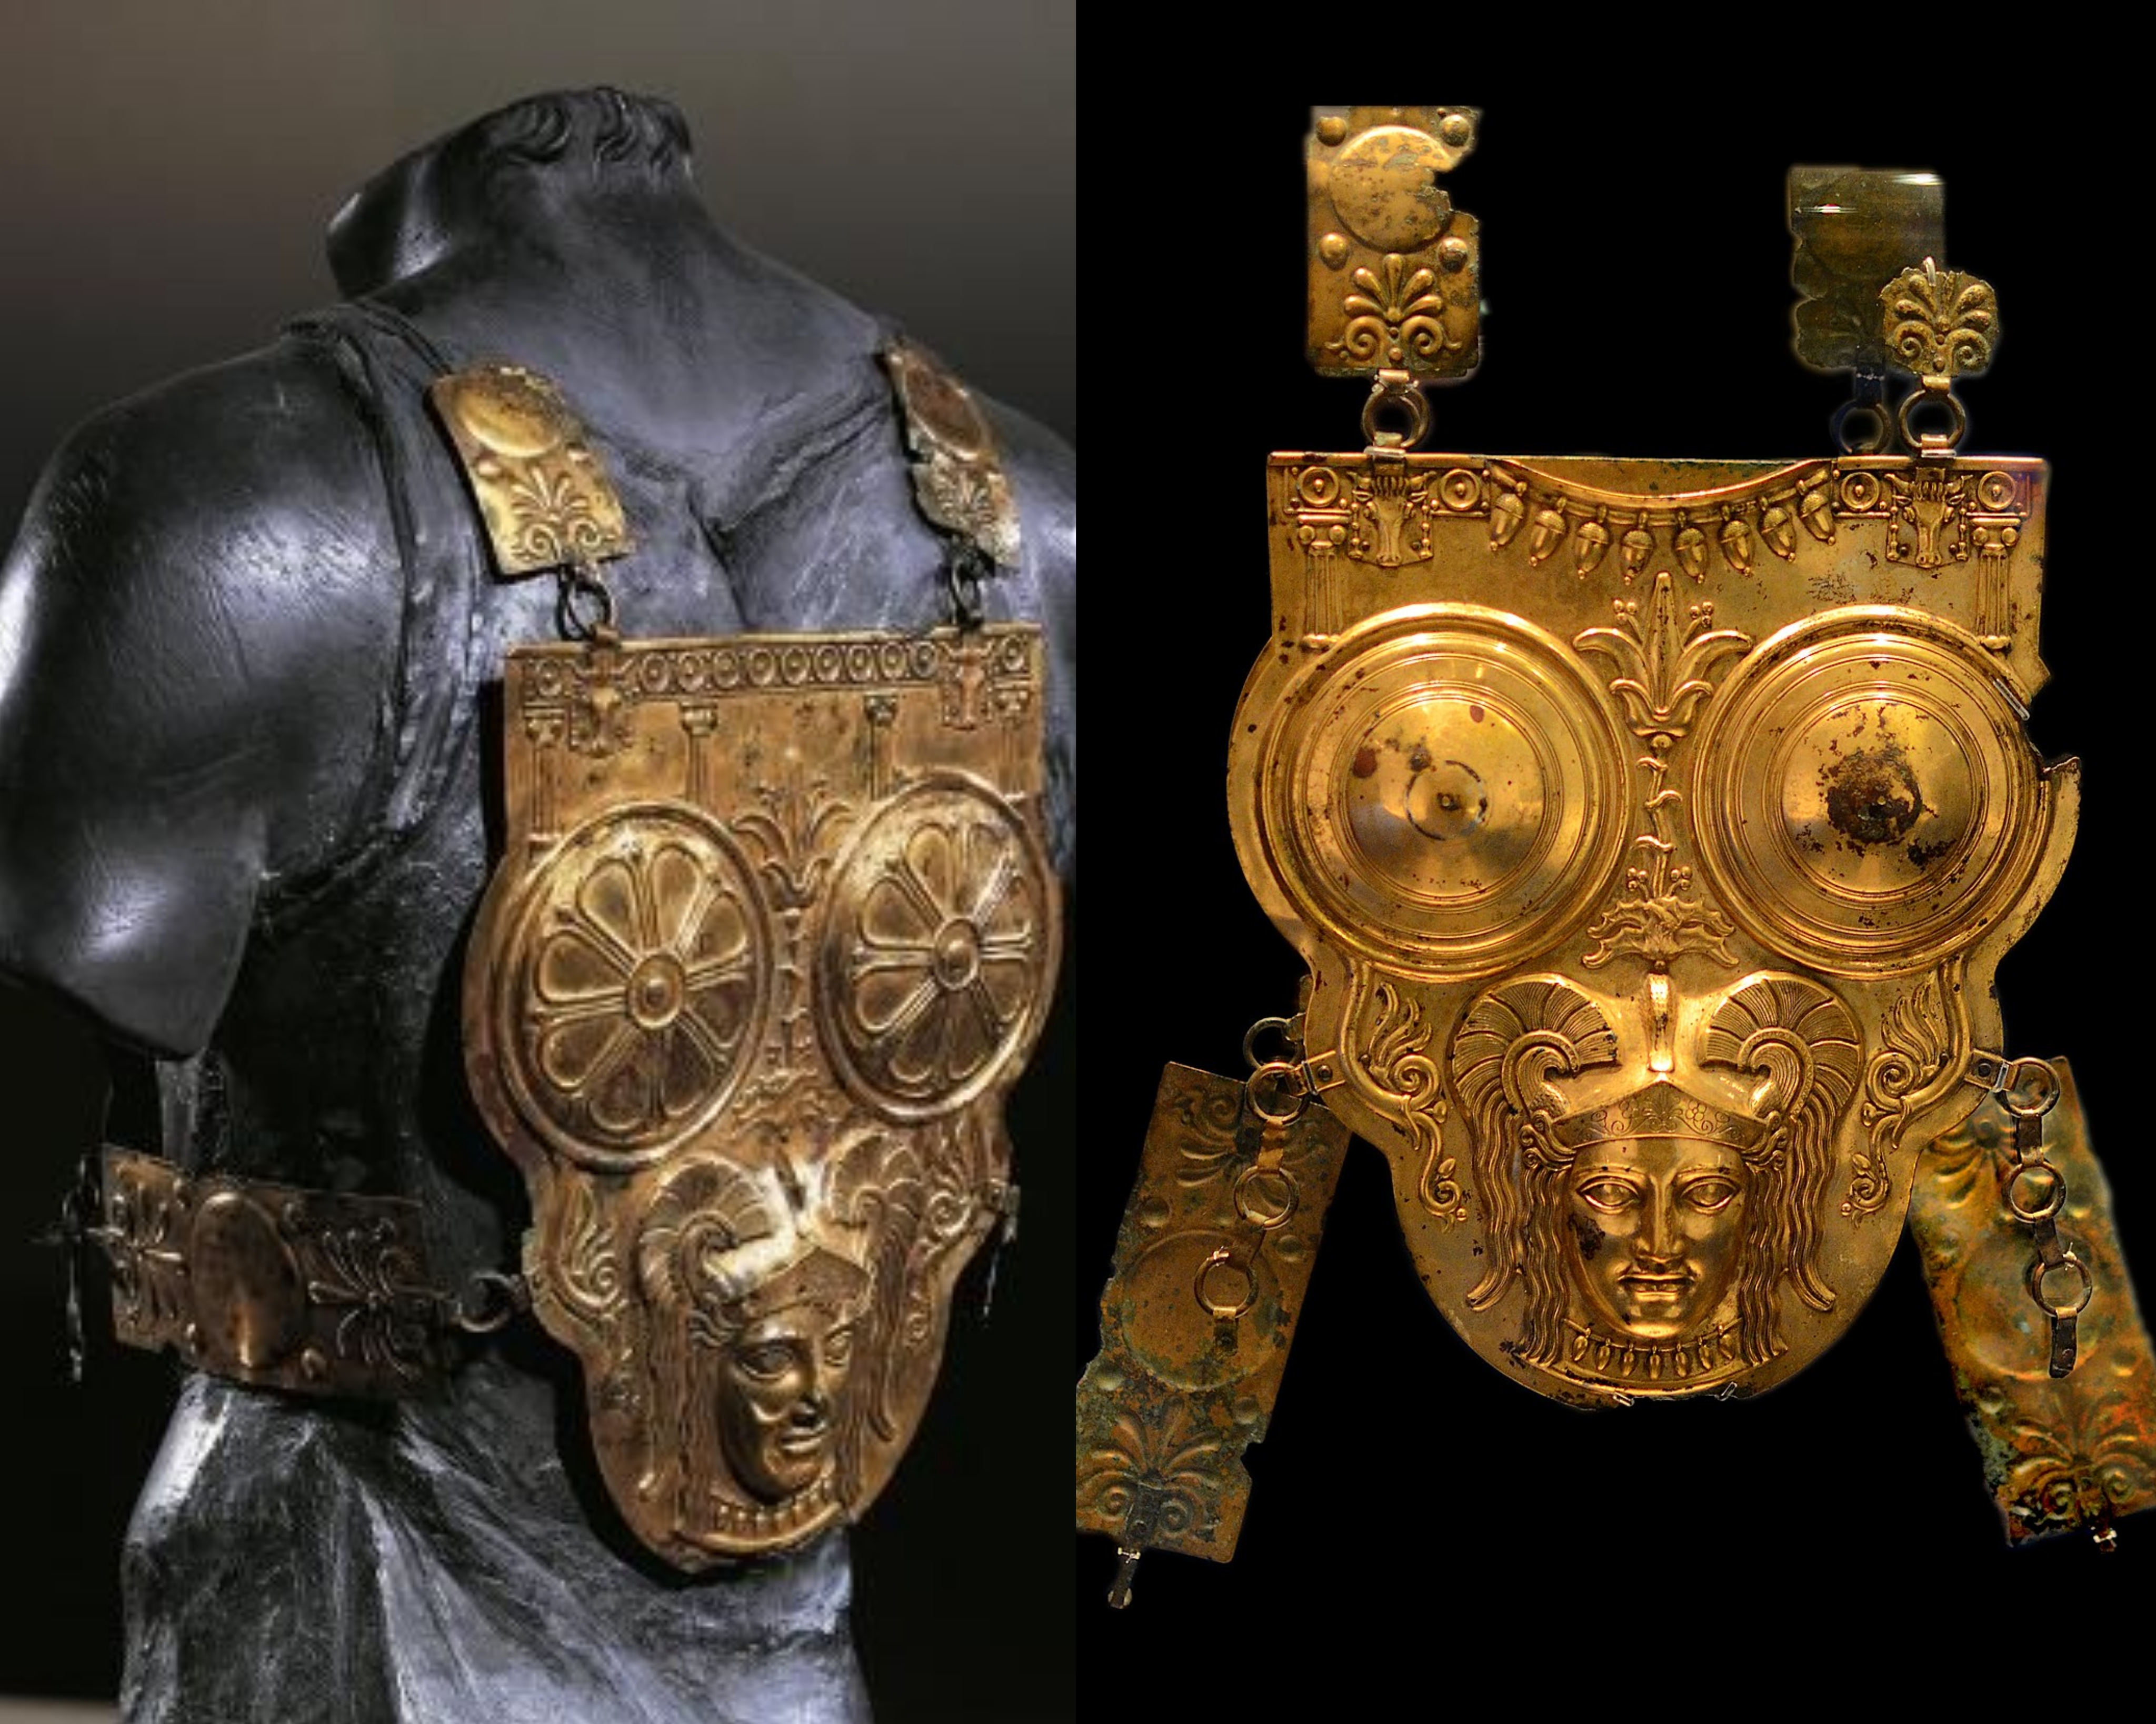 Breastplate of gilded bronze; 3rd century BC, artifact was discovered in 1919 in Carthaginian tomb at Ksour Essaf in Tunisia. It is thought to have been used in Punic Wars between Rome and Carthage.jpg